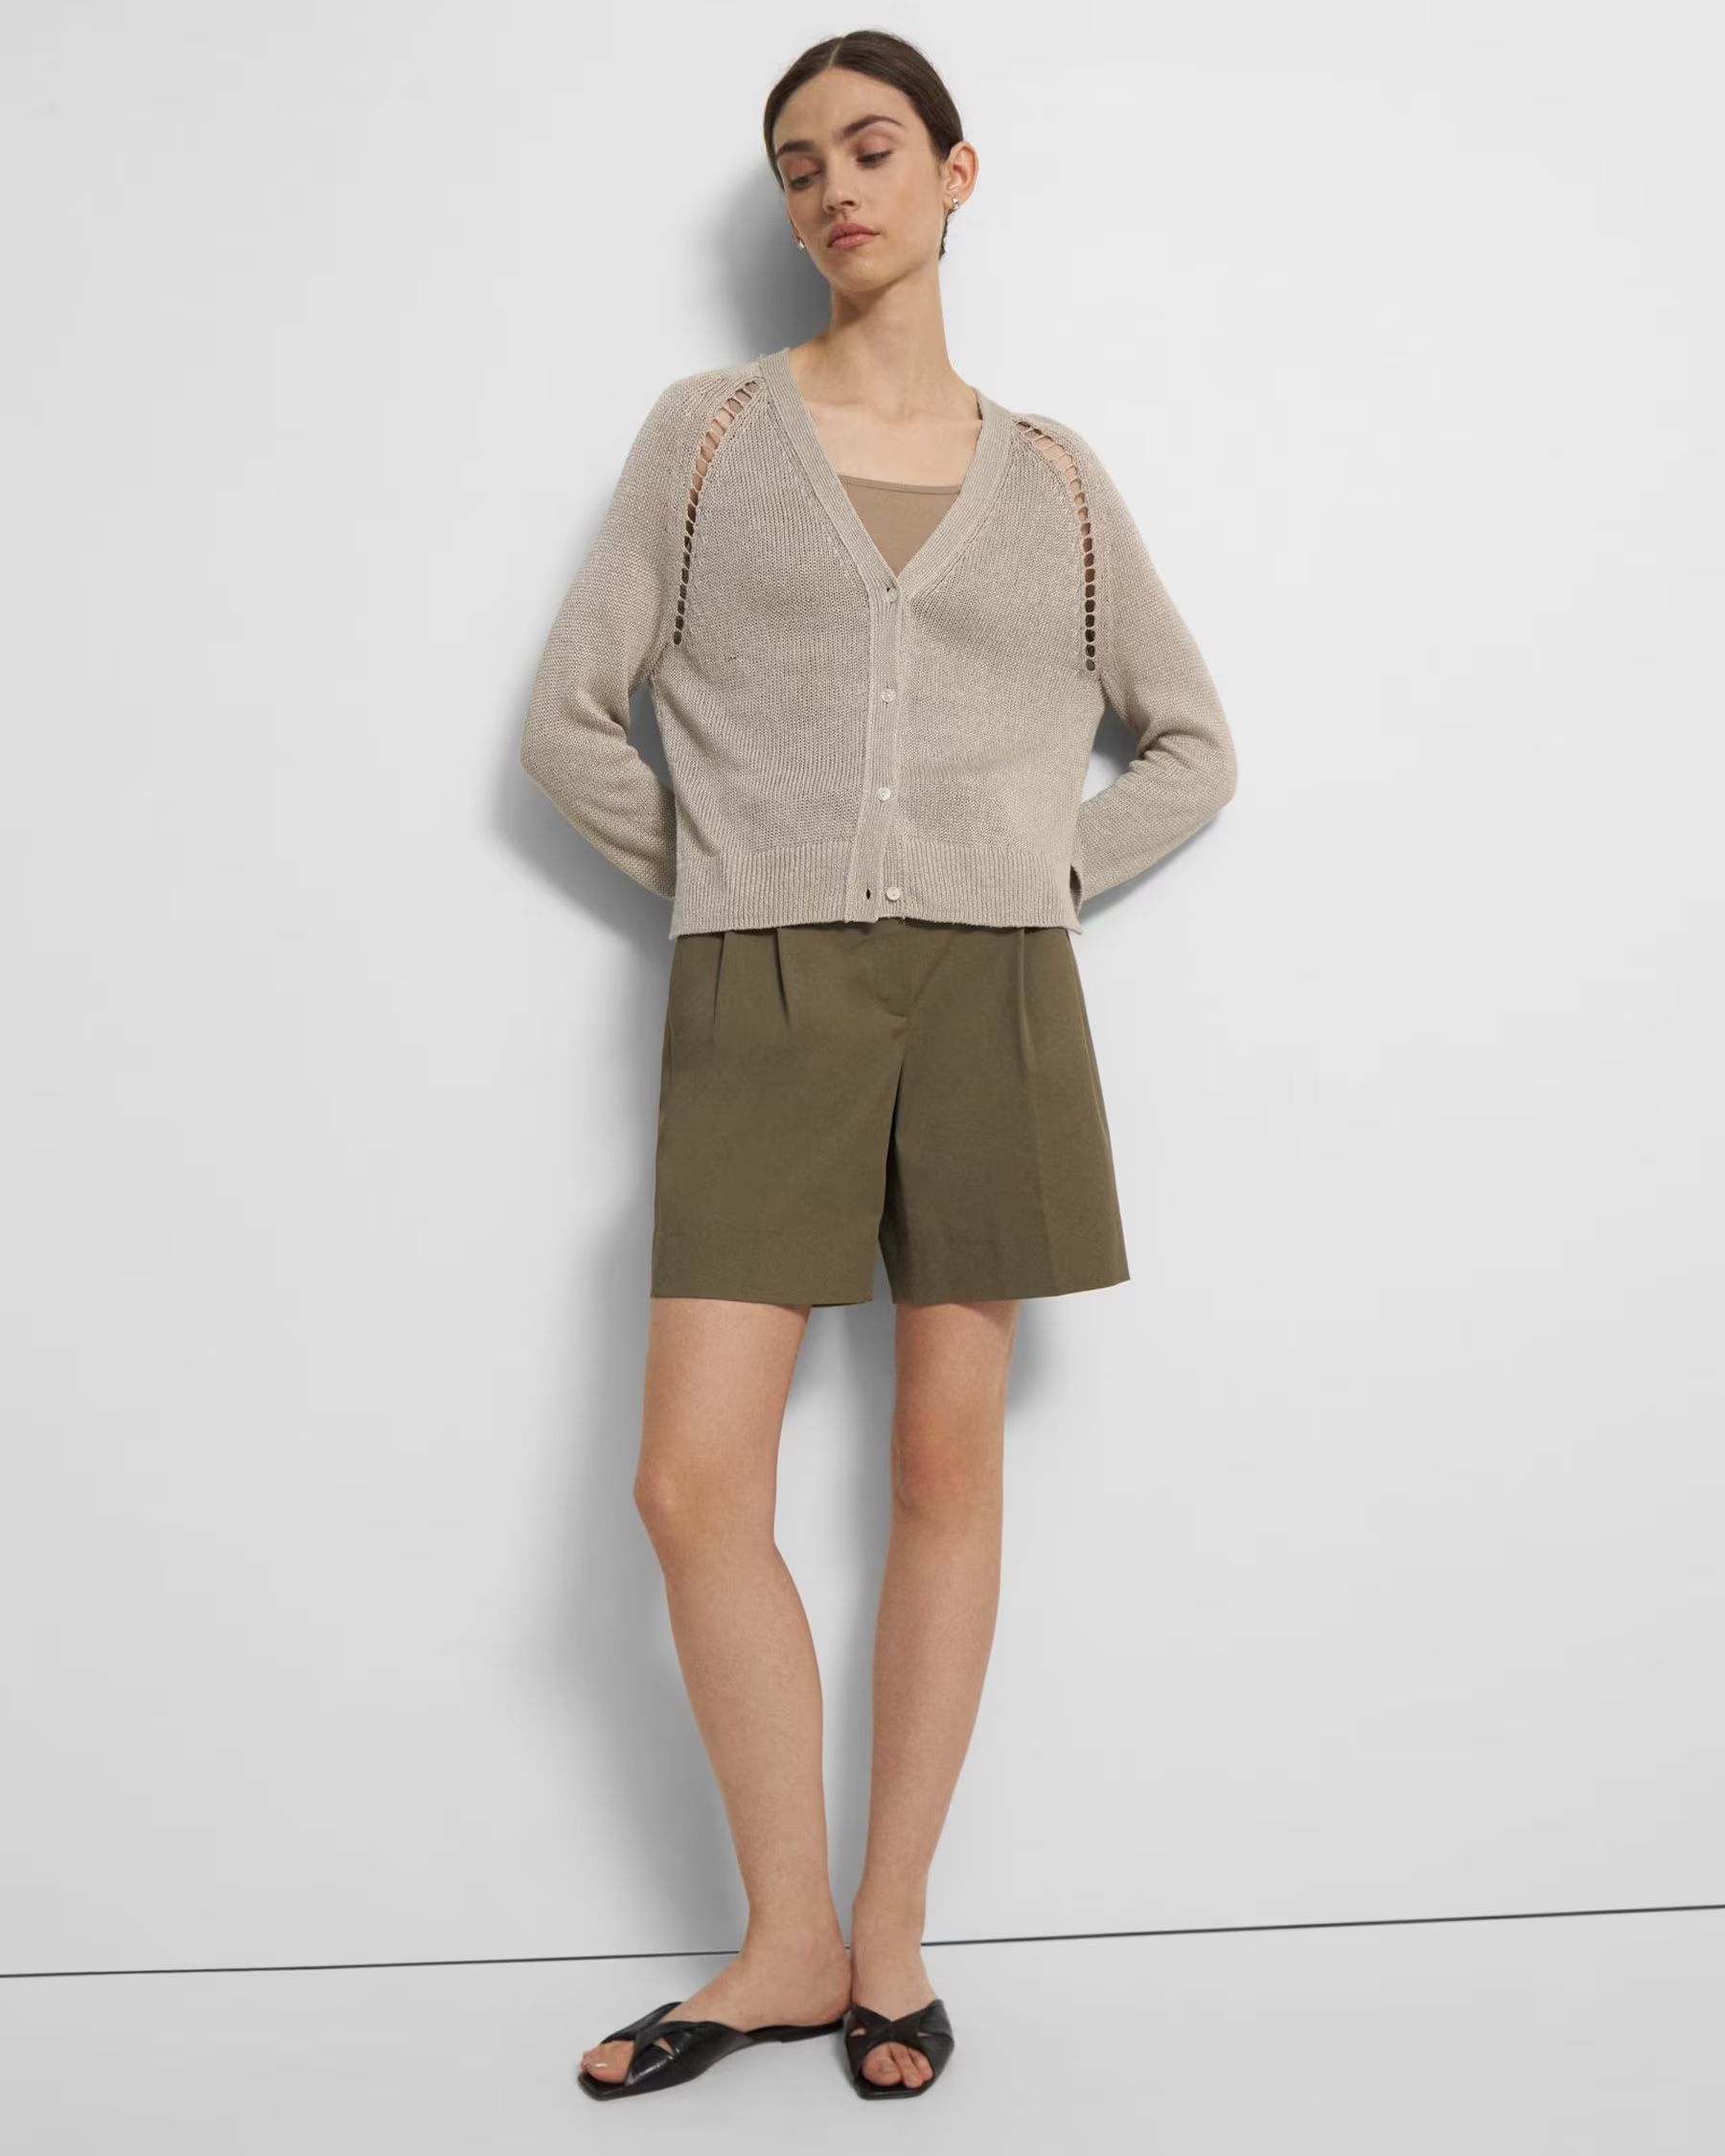 Hanelee Cropped Cardigan in Knit Linen | Theory UK